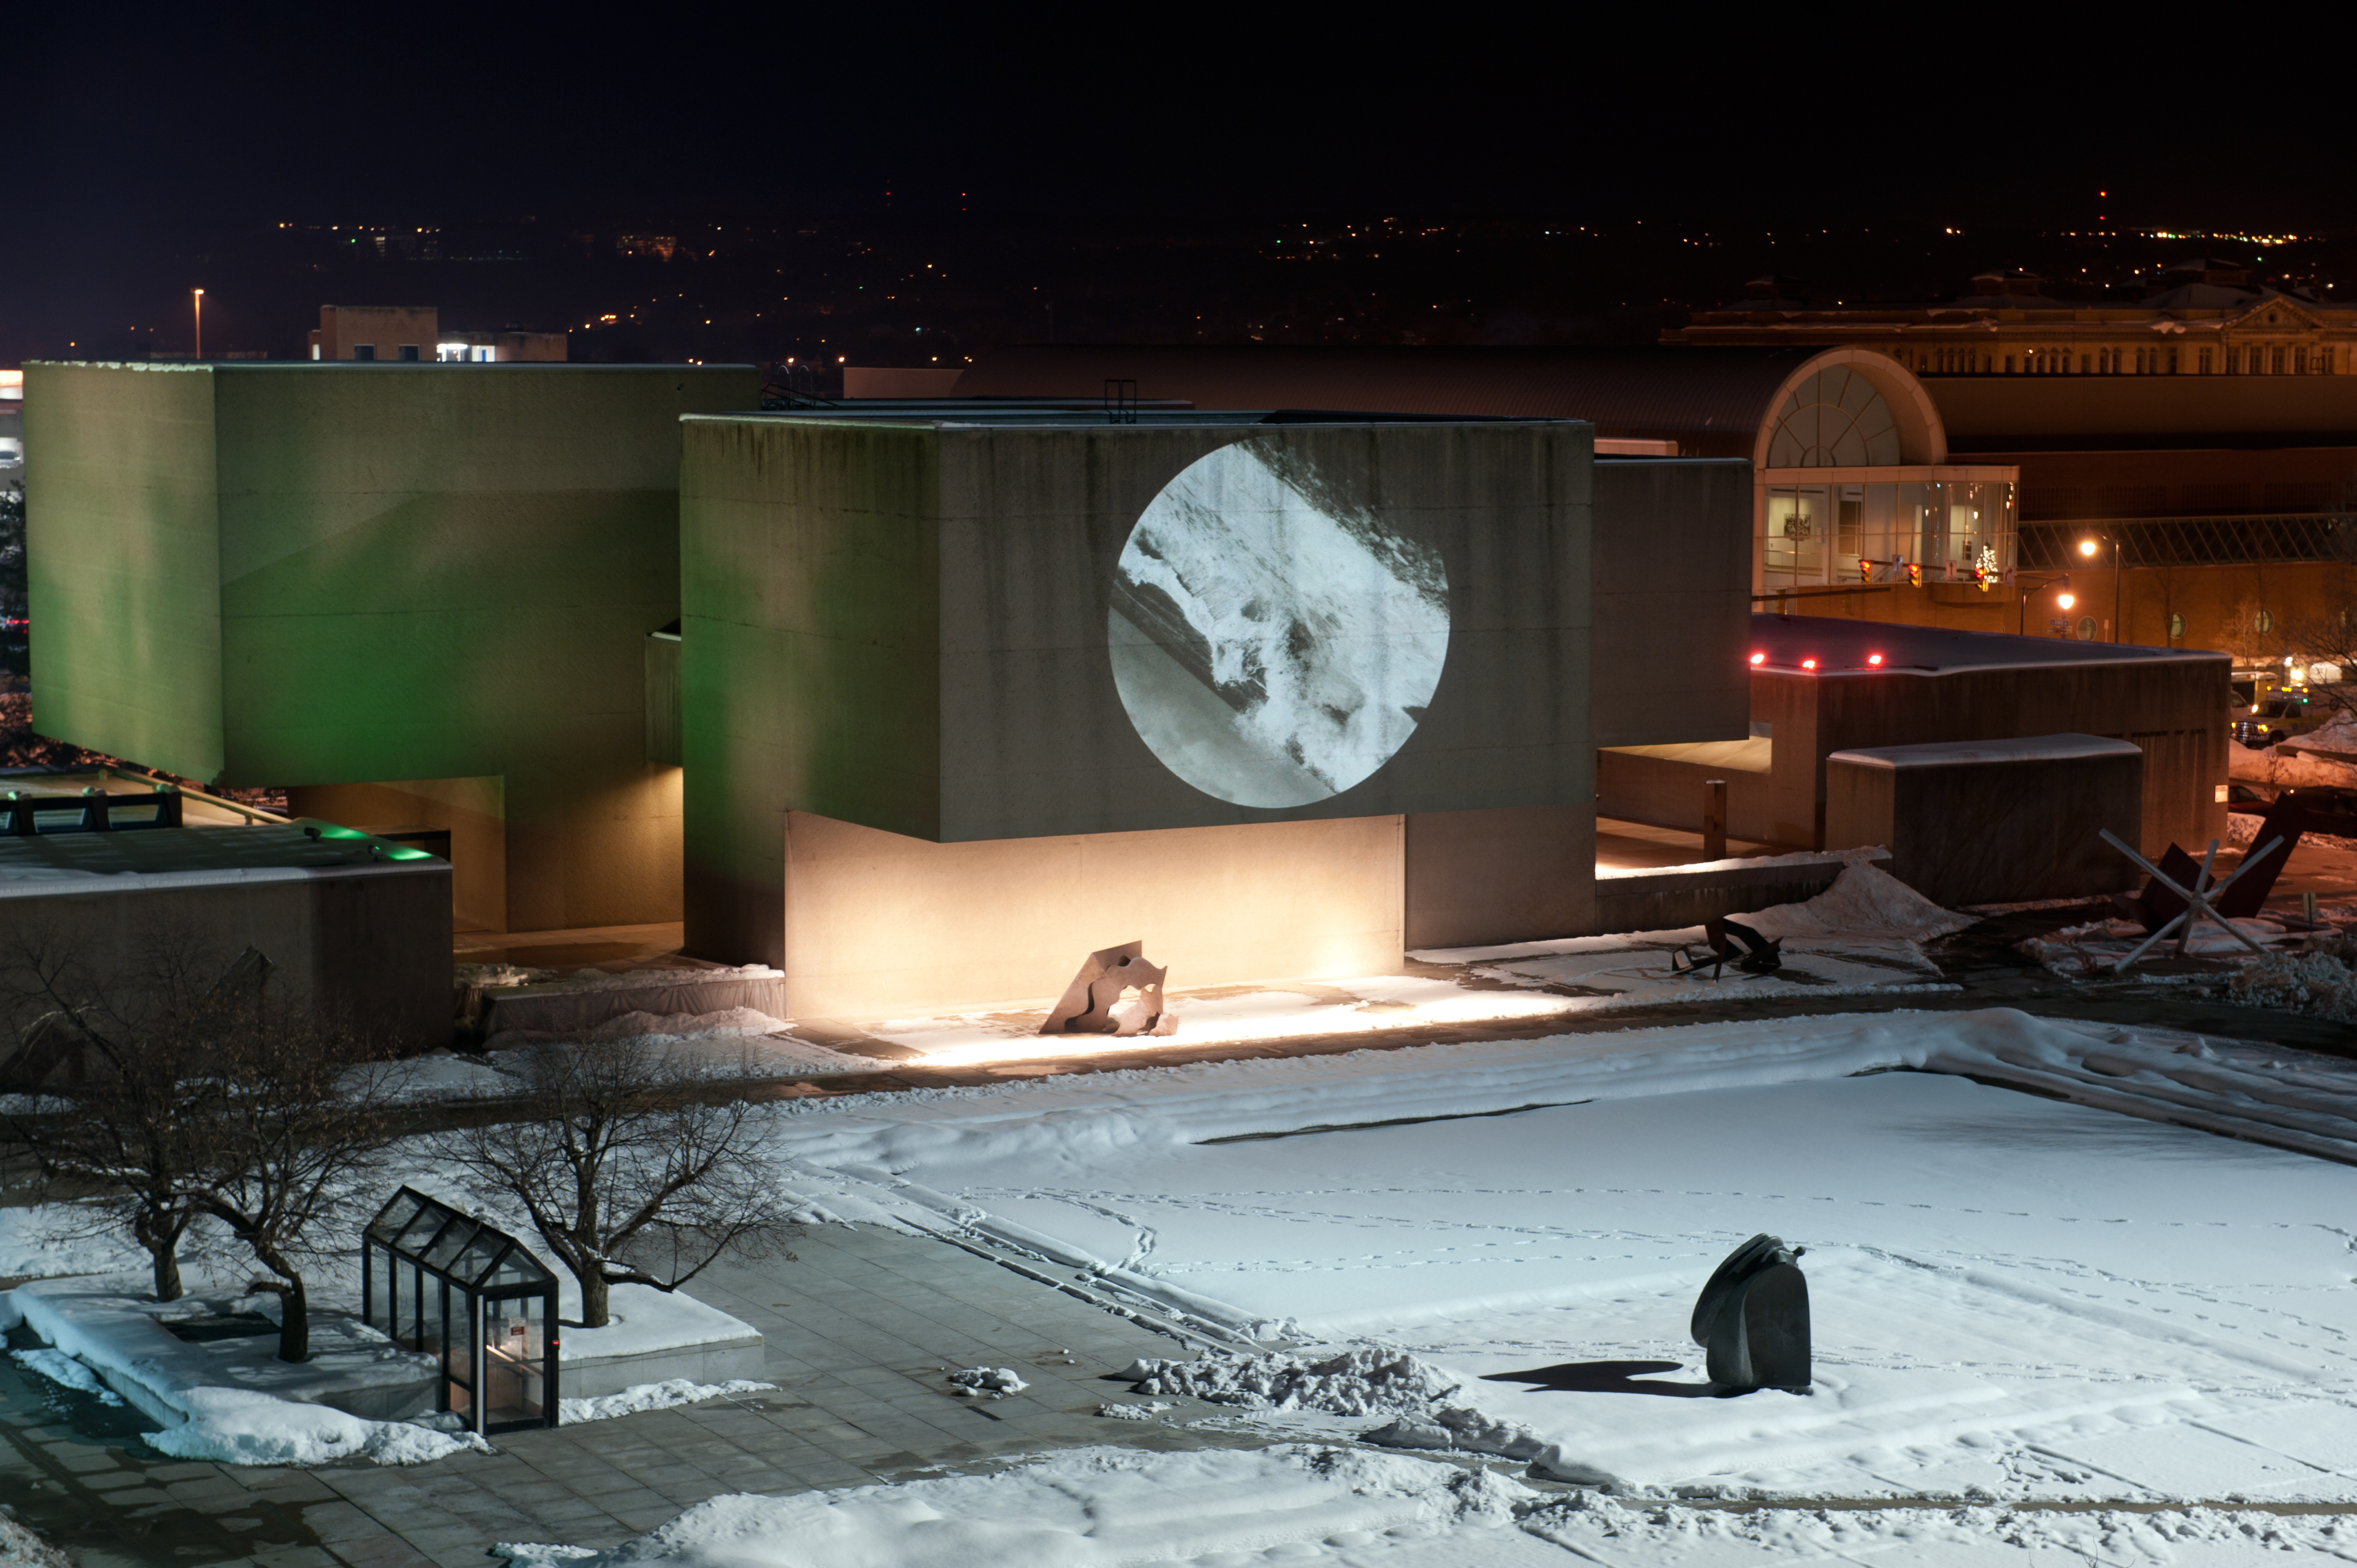 Projected onto the exterior of the Everson Museum in Syracuse, New York, this video depicts a still image of a crashing wave constantly turning in the ocean. The movement of the video speaks to the rotation of the moon and its gravitational effect on tides.